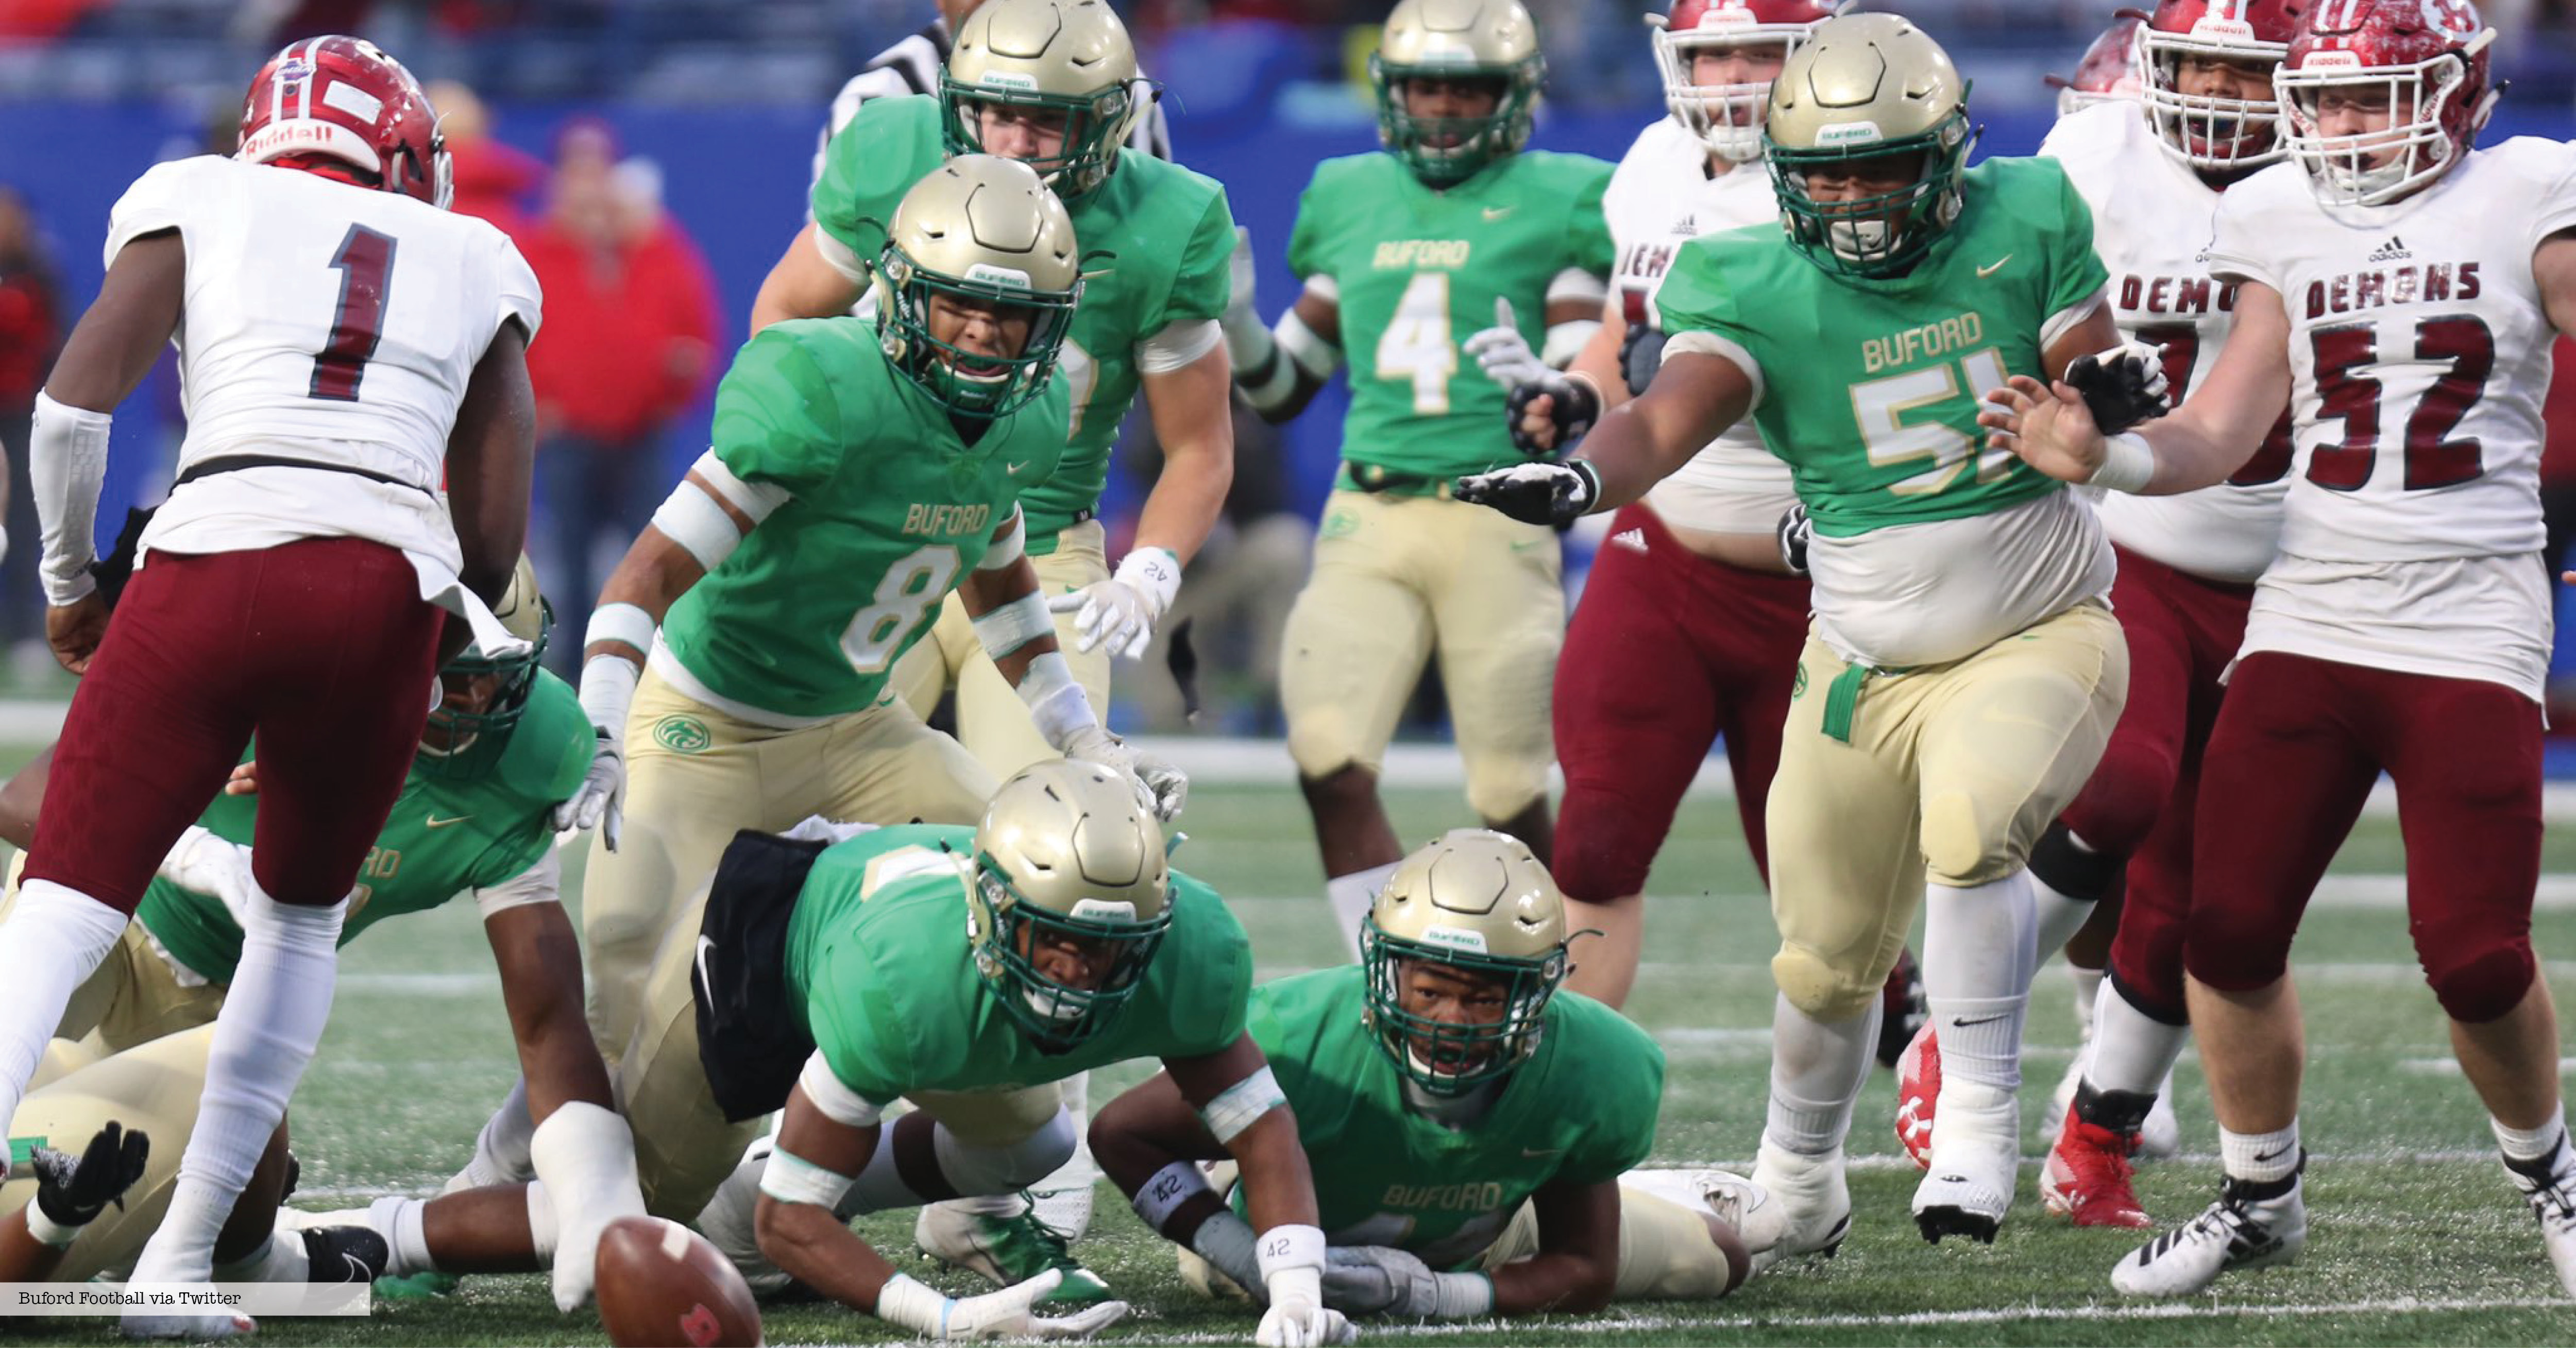 Buford Football 2021 Team Preview ITG Next